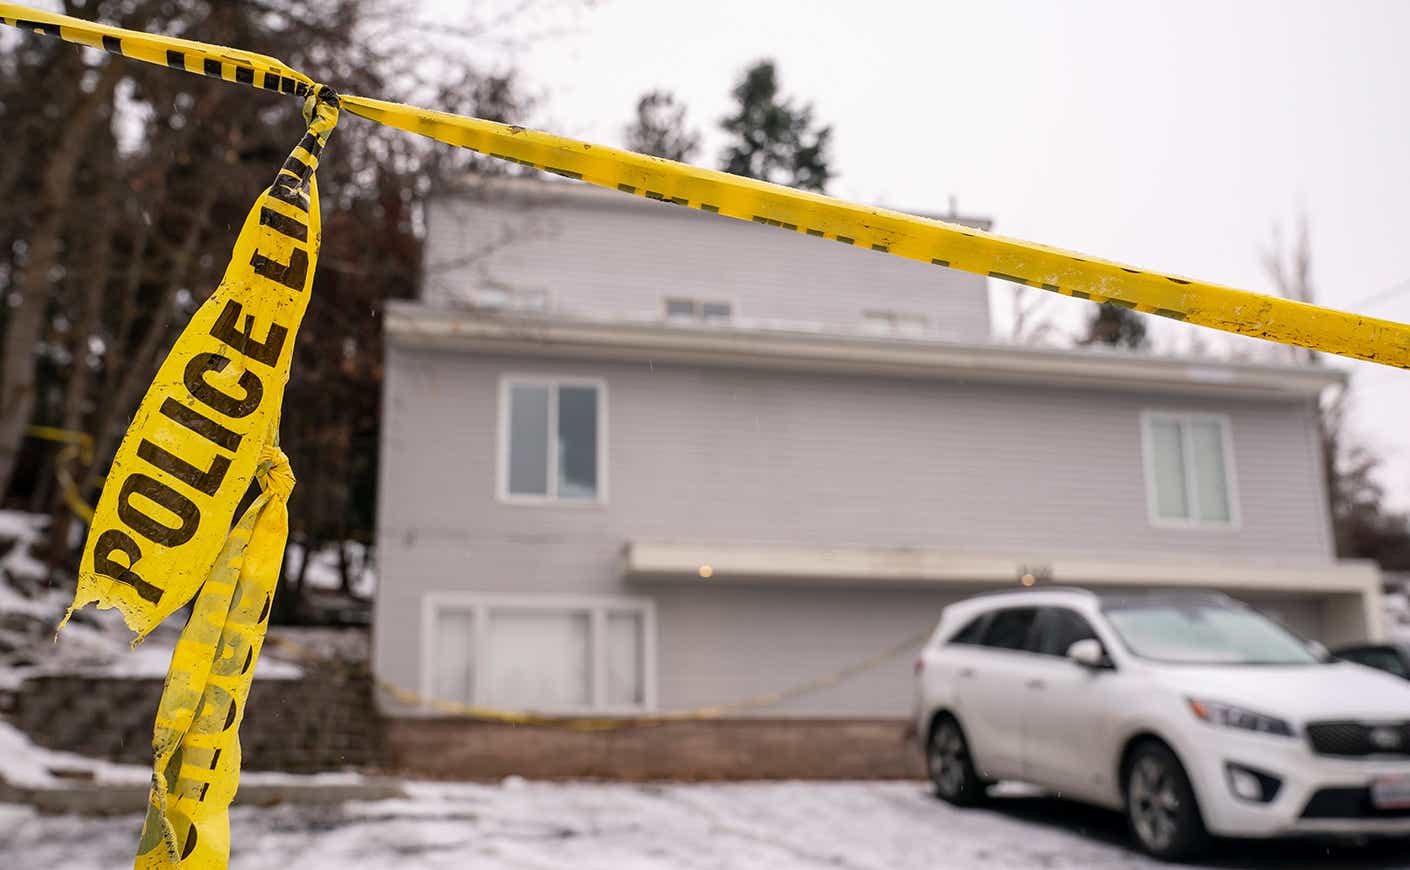 Police tape is seen at a home that is the site of a quadruple murder on January 3, 2023 in Moscow, Idaho